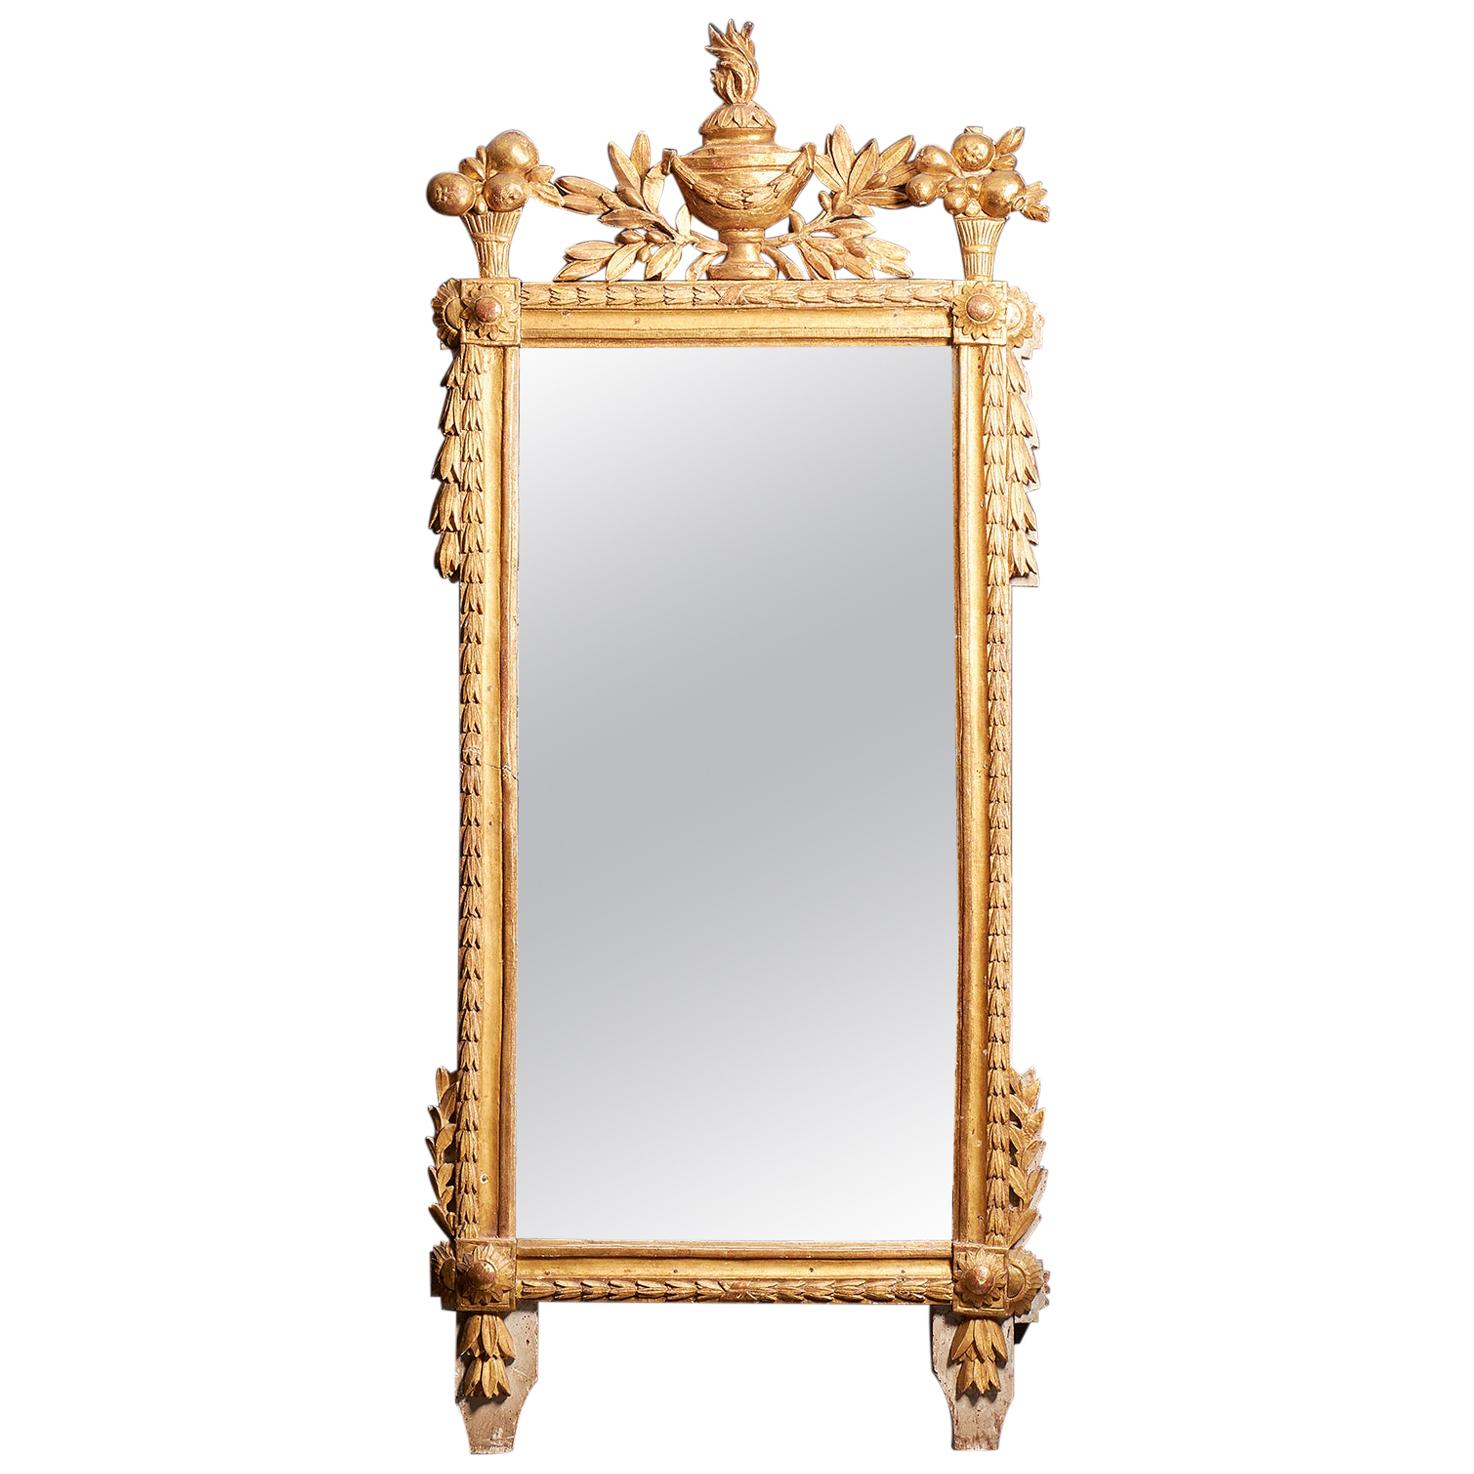 18th Century French Neoclassical Giltwood Mirror